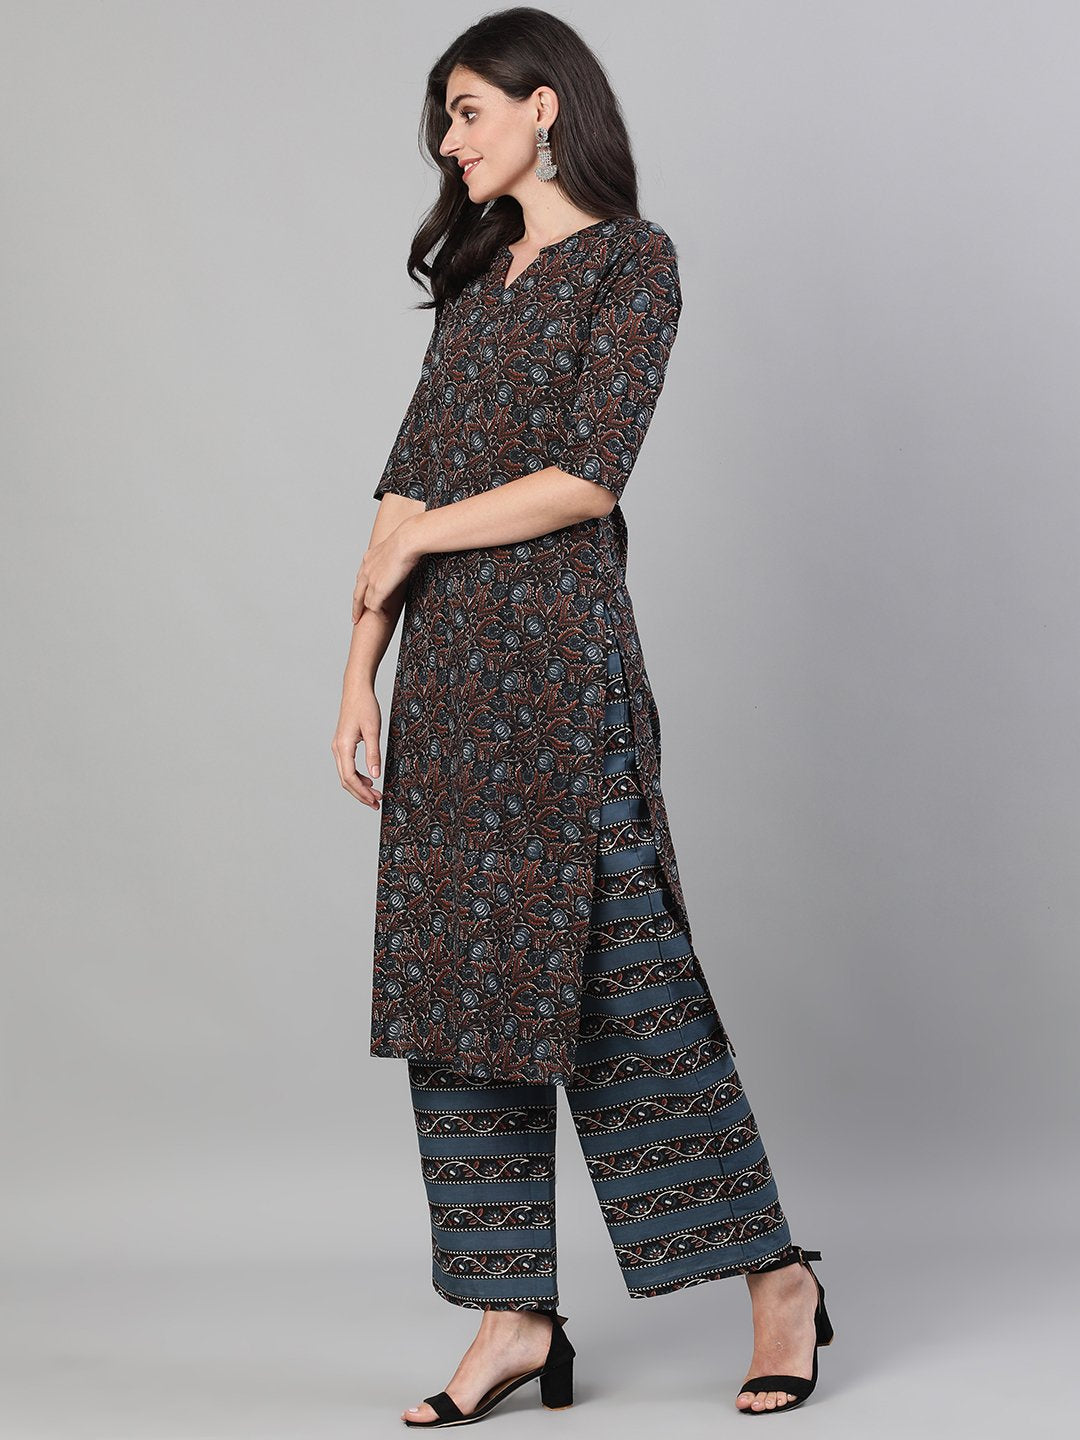 Women's Brown And Blue Three-Quarter Sleeves Straight Kurta With Palazzo With Pockets And Face Mask - Nayo Clothing